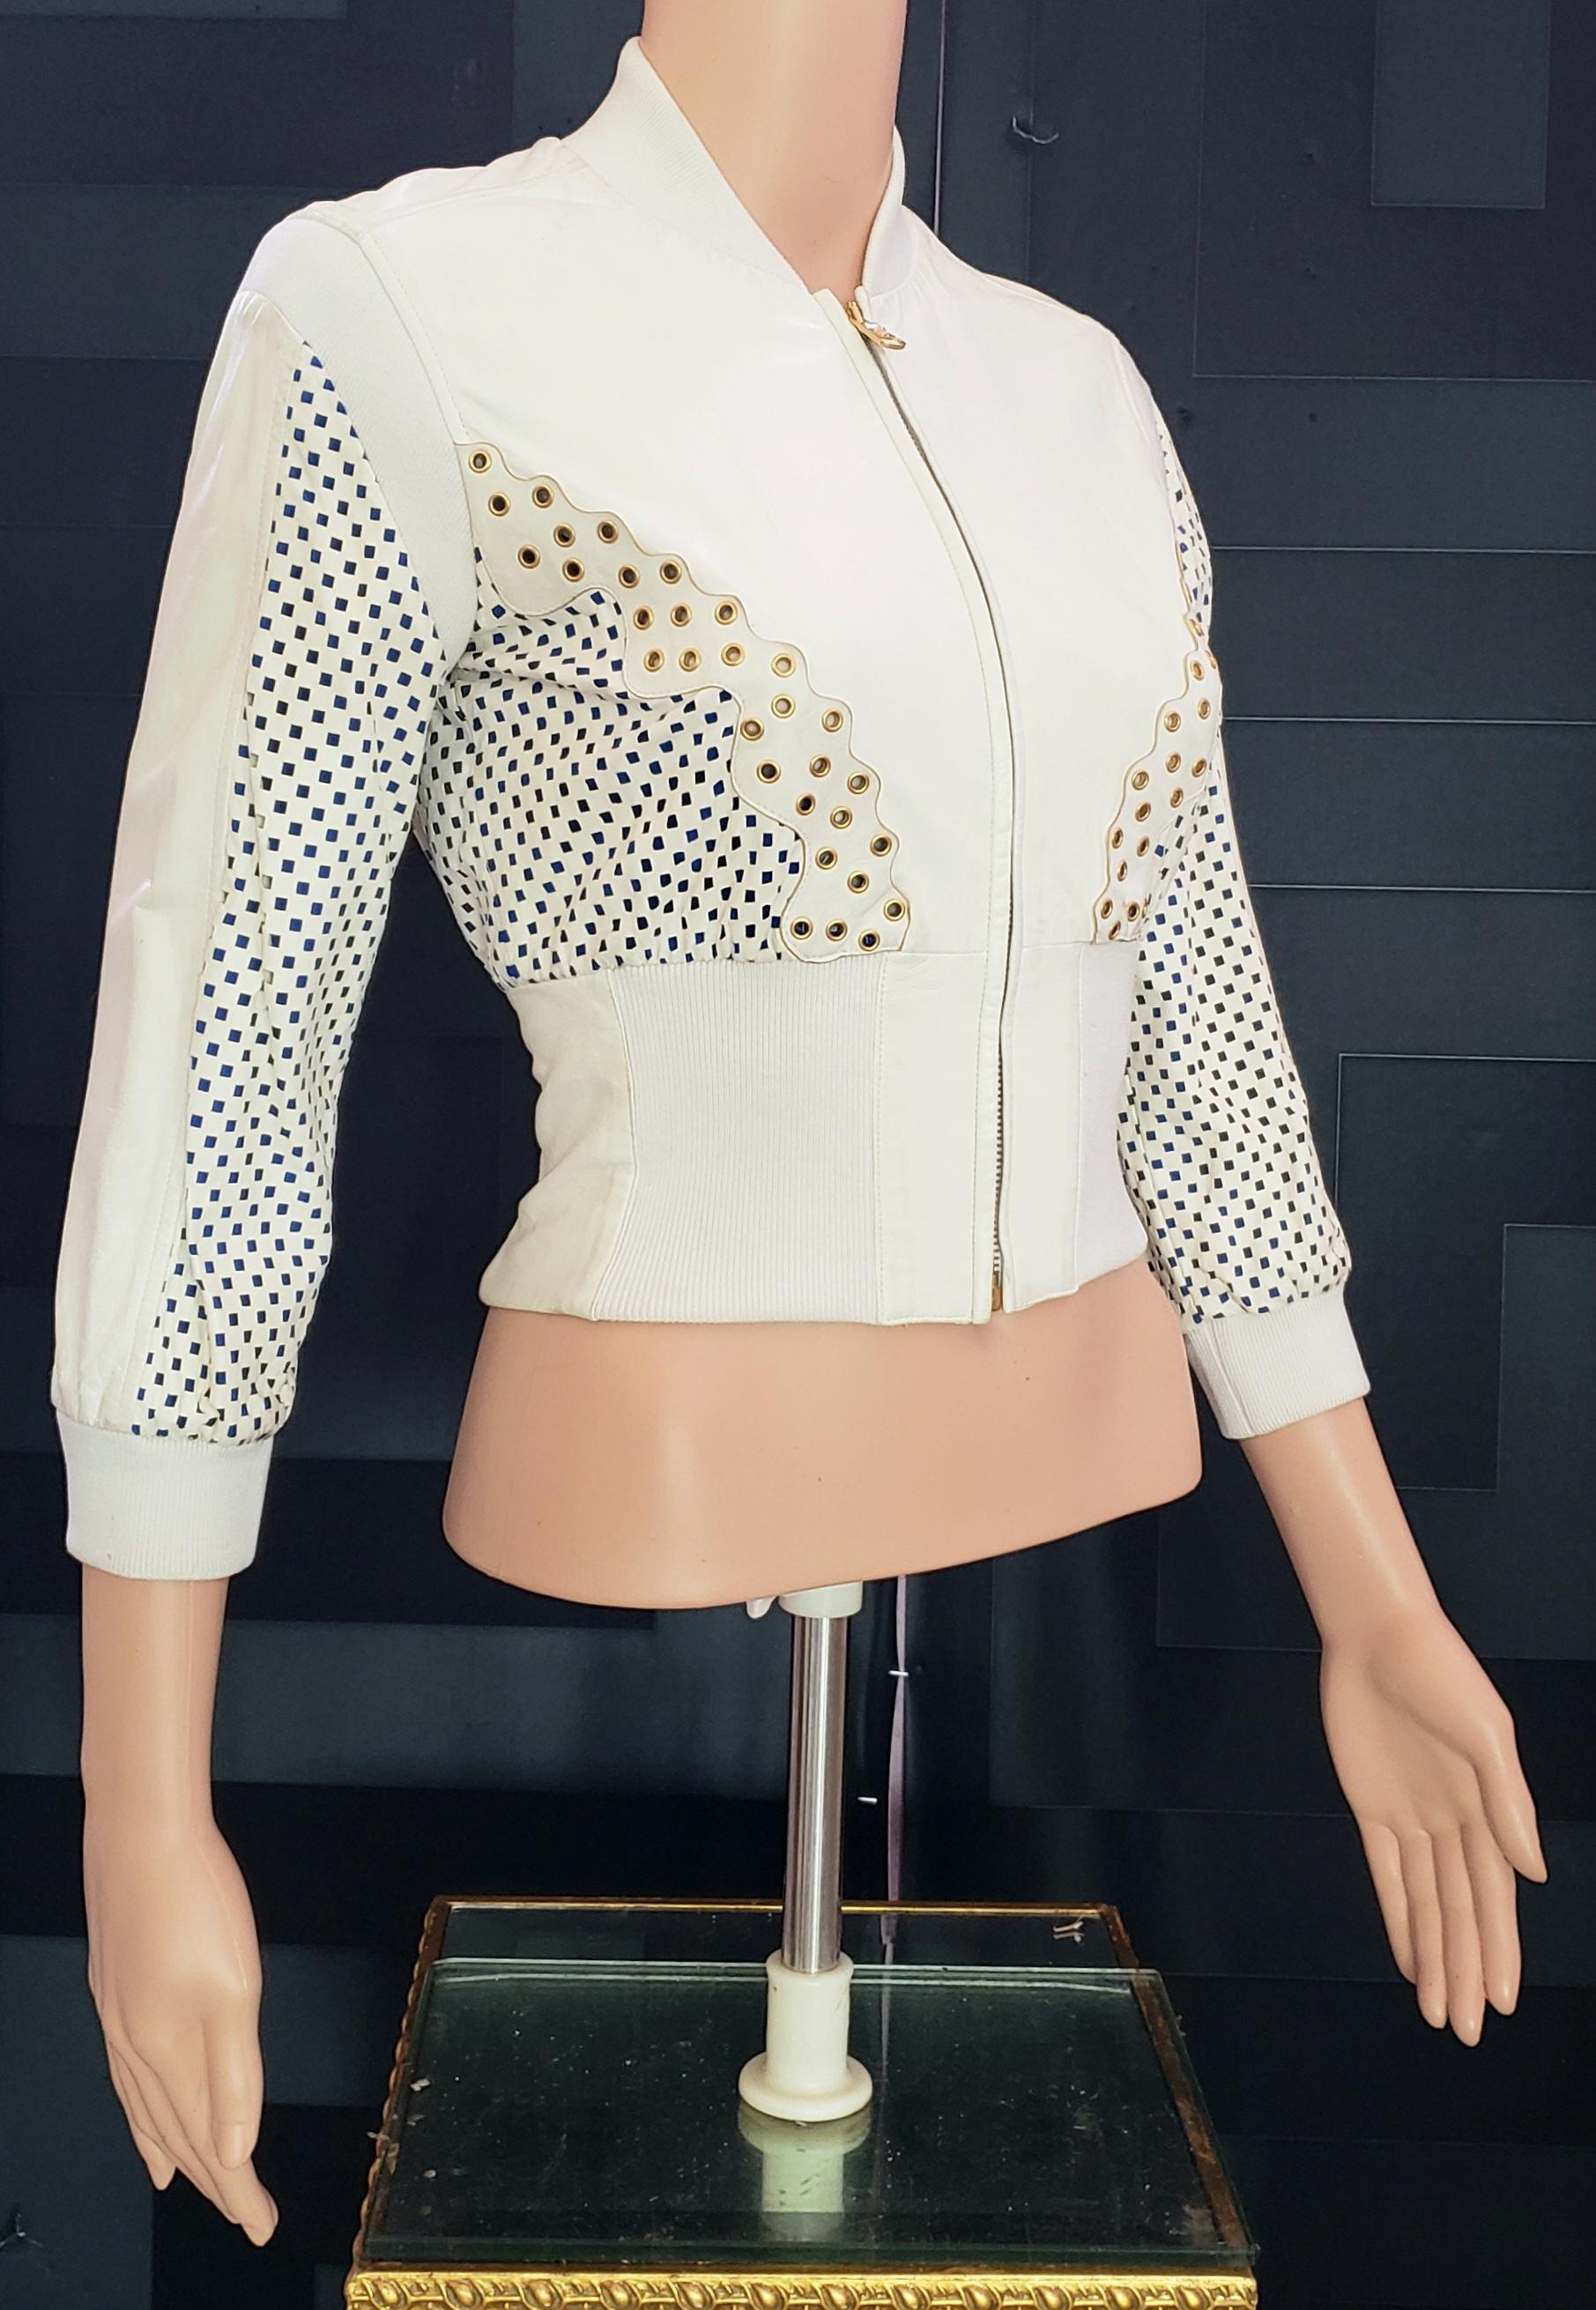 Women's NEW VERSACE RESORT 2012 LOOK#16 CROPPED LEATHER WHITE ZIPPER JACKET Sz 38 - 2 For Sale